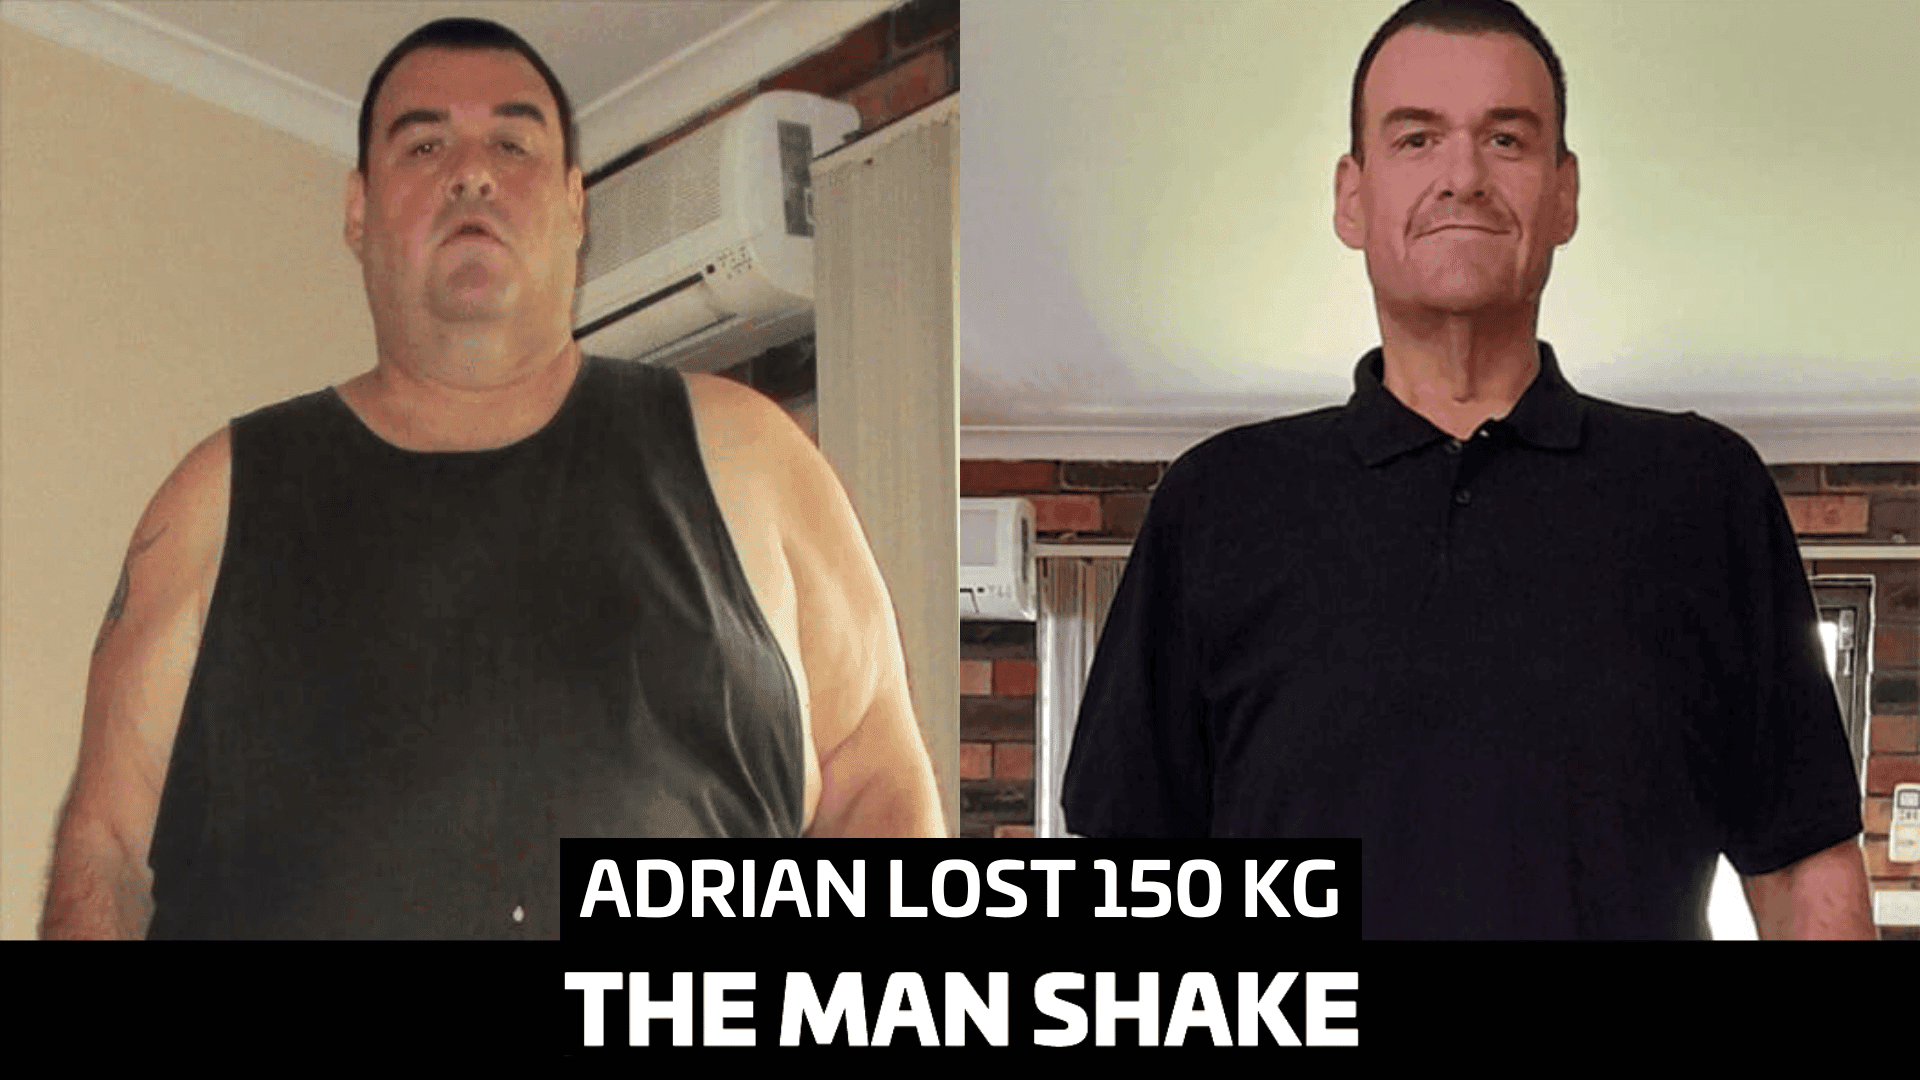 The biggest weight loss transformation ever! Adrian lost 150kg